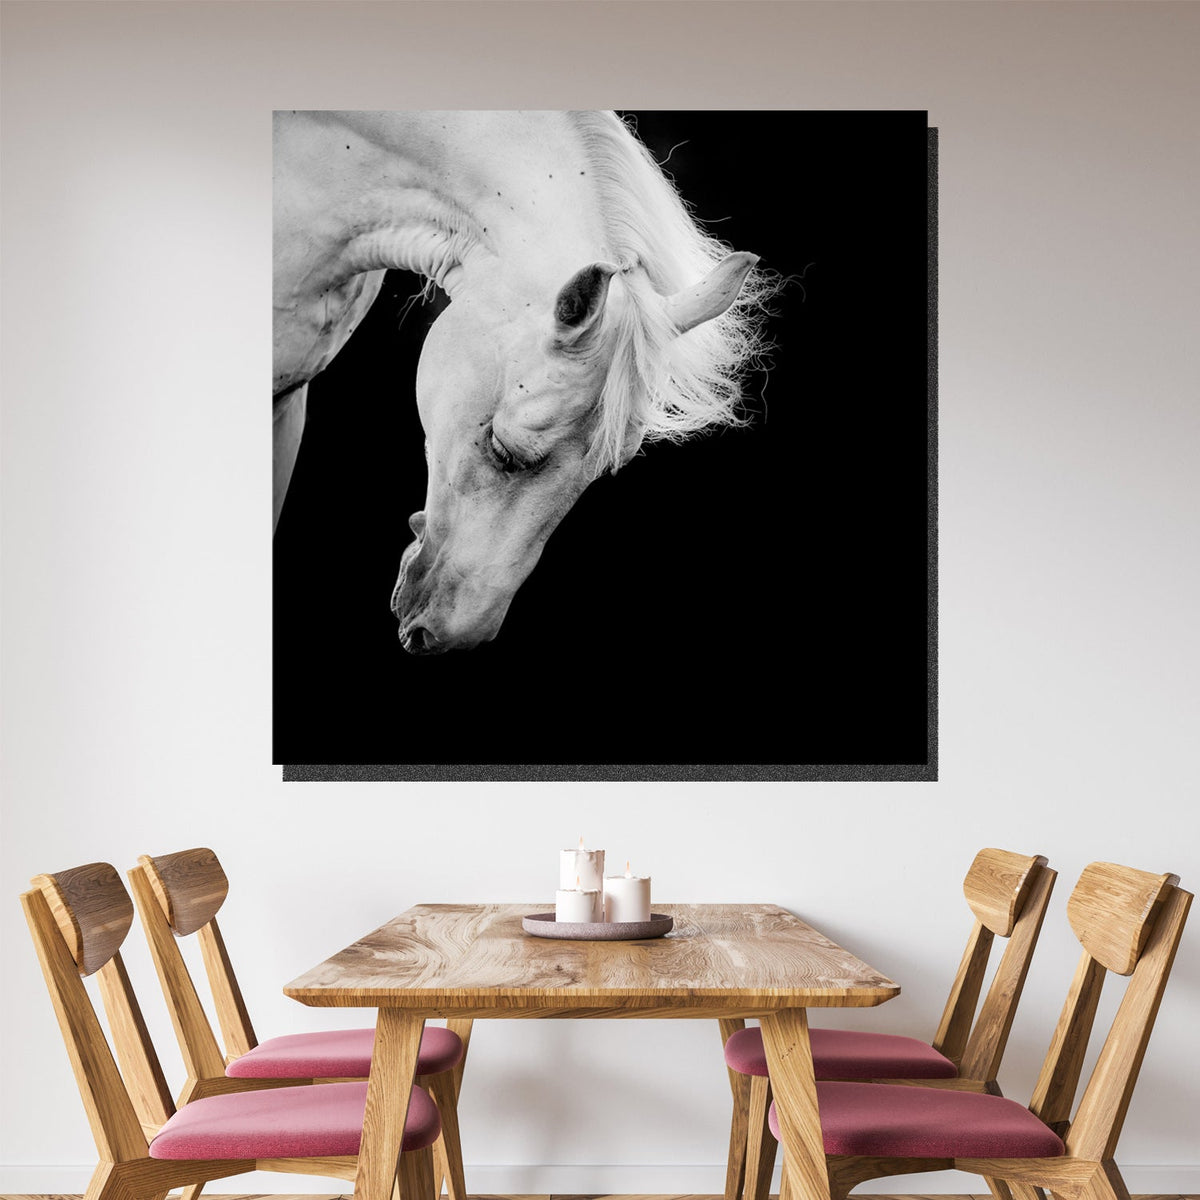 https://cdn.shopify.com/s/files/1/0387/9986/8044/products/WhiteHorseCanvasArtprintStretched-3.jpg